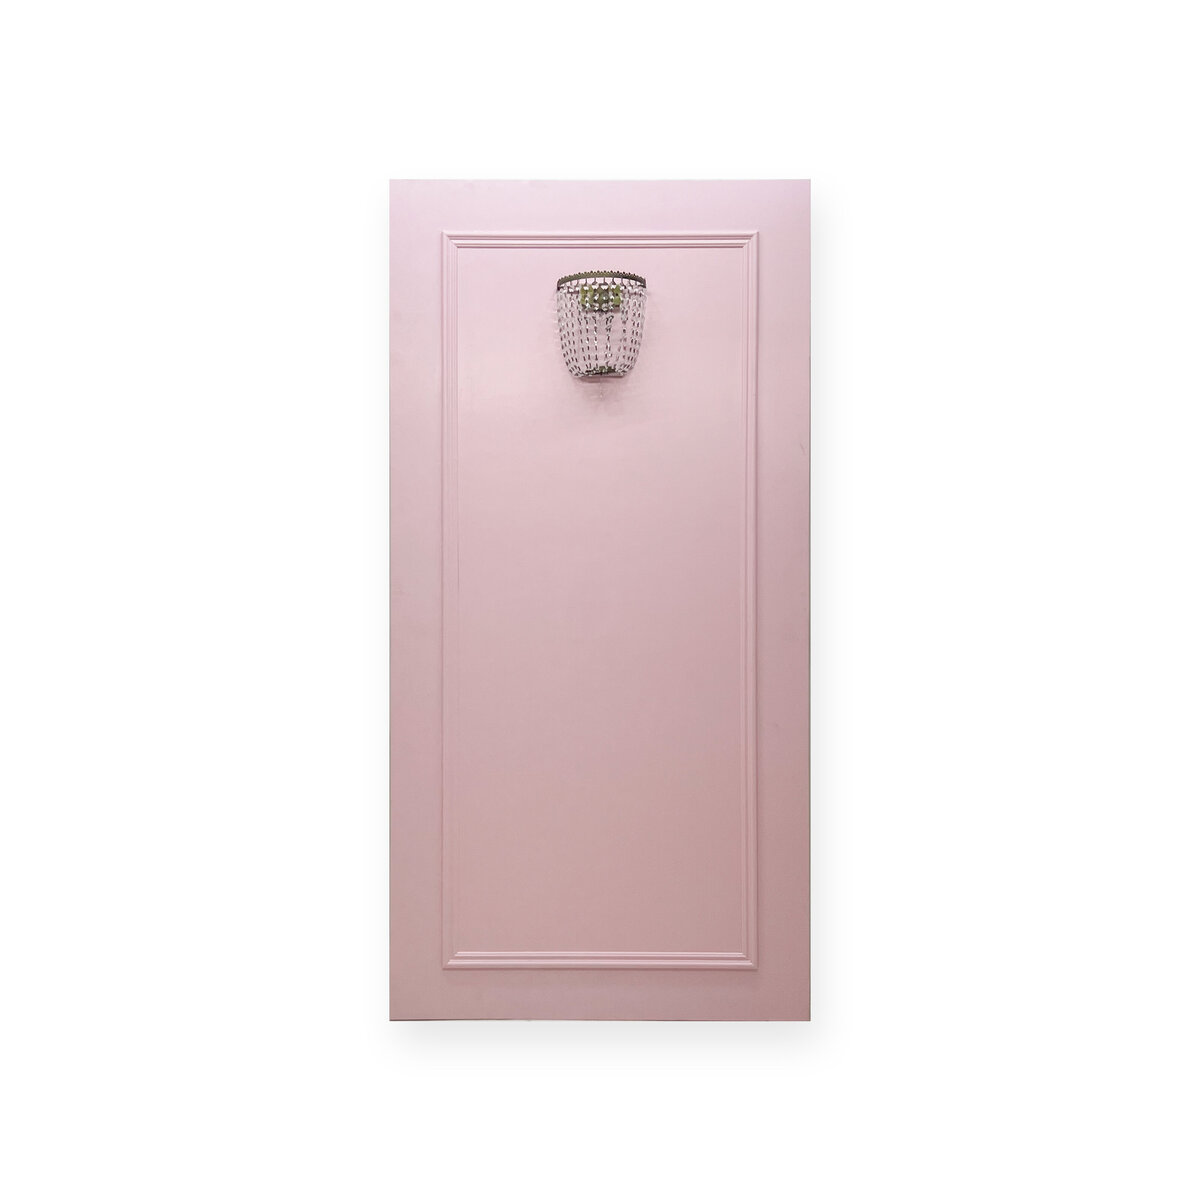 Mood Events_Pink Sconce Wall